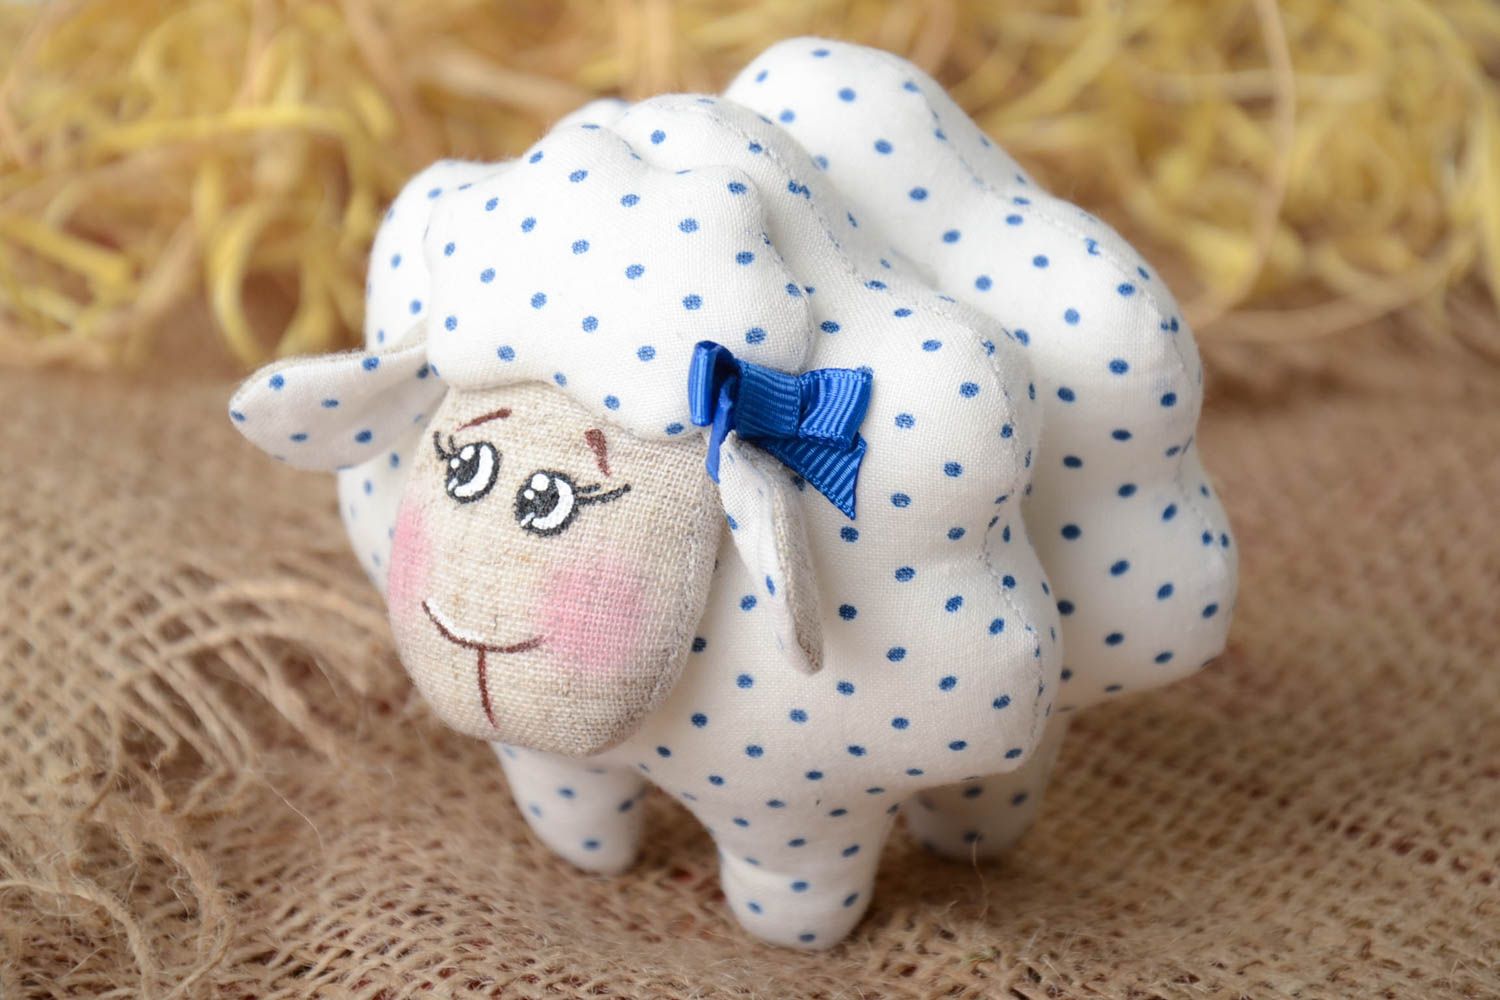 Handmade small white and blue polka dot linen and cotton fabric soft toy lamb photo 1